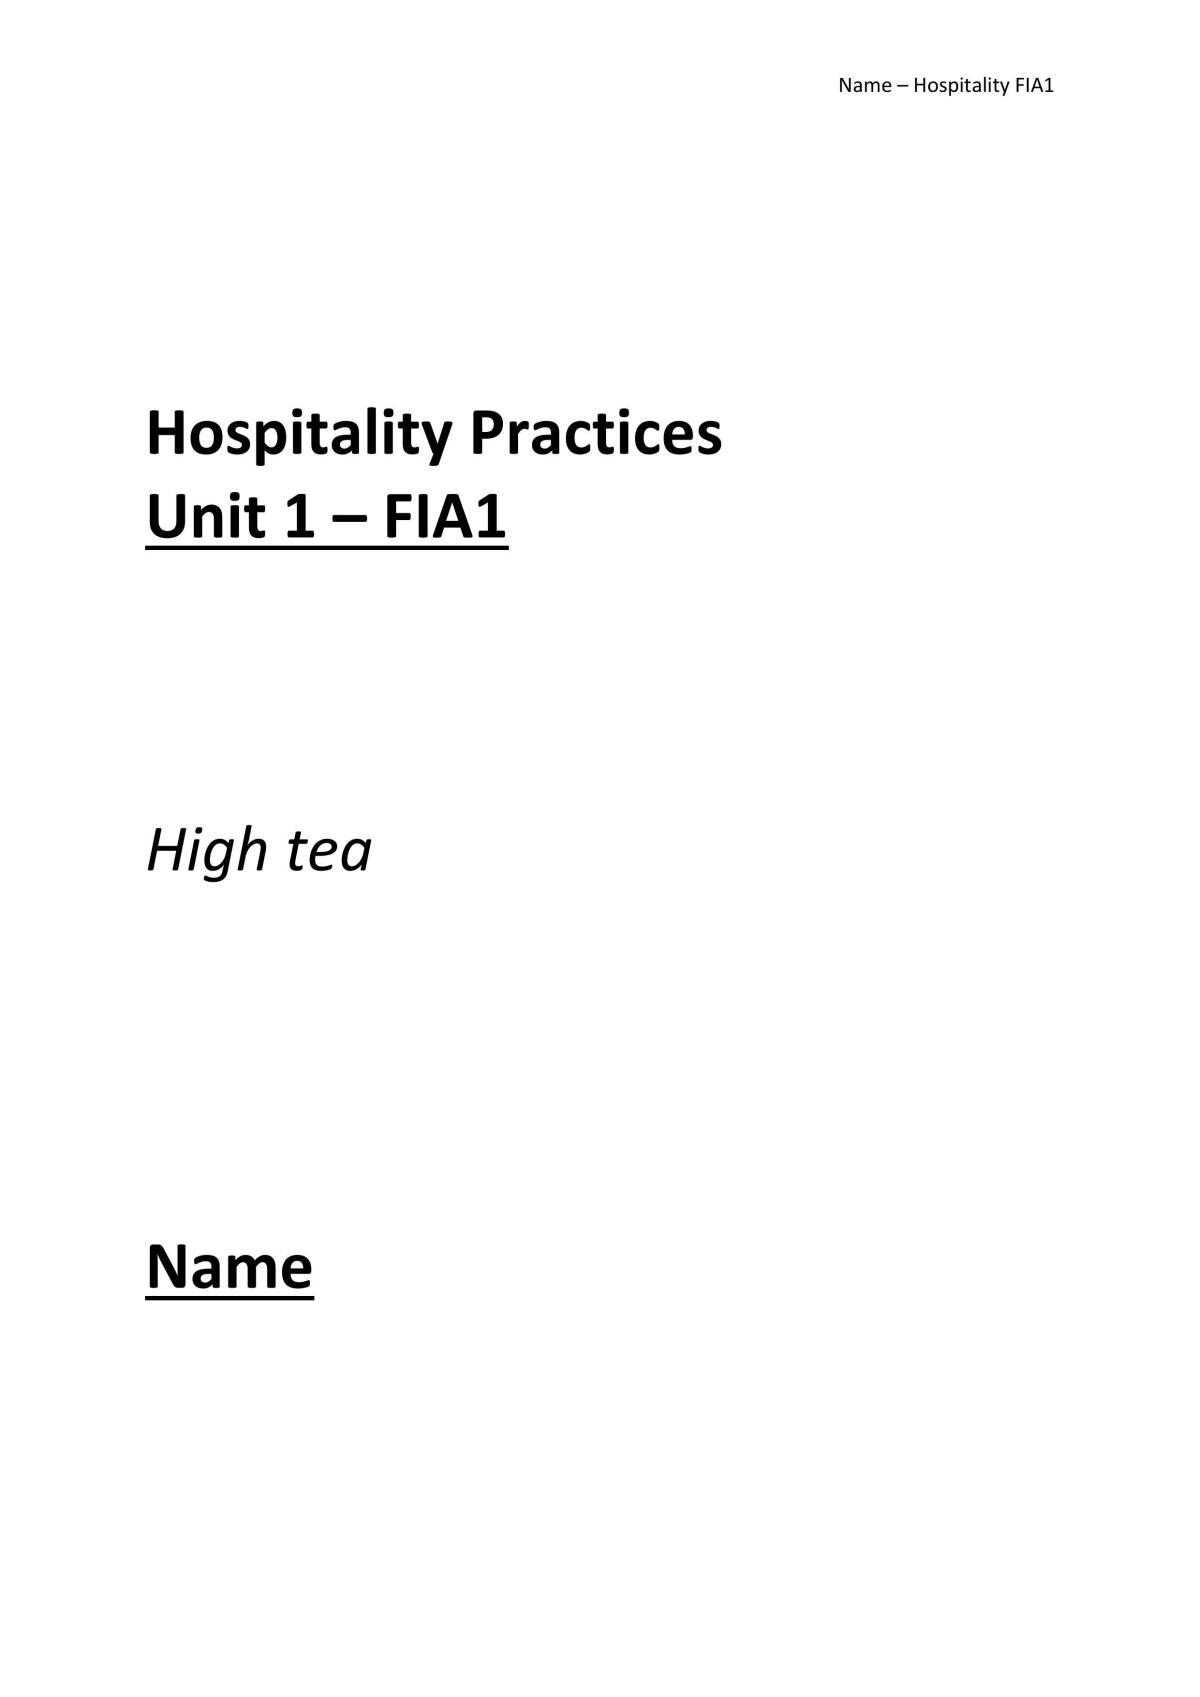 Hospitality practices IA1 project - Page 1